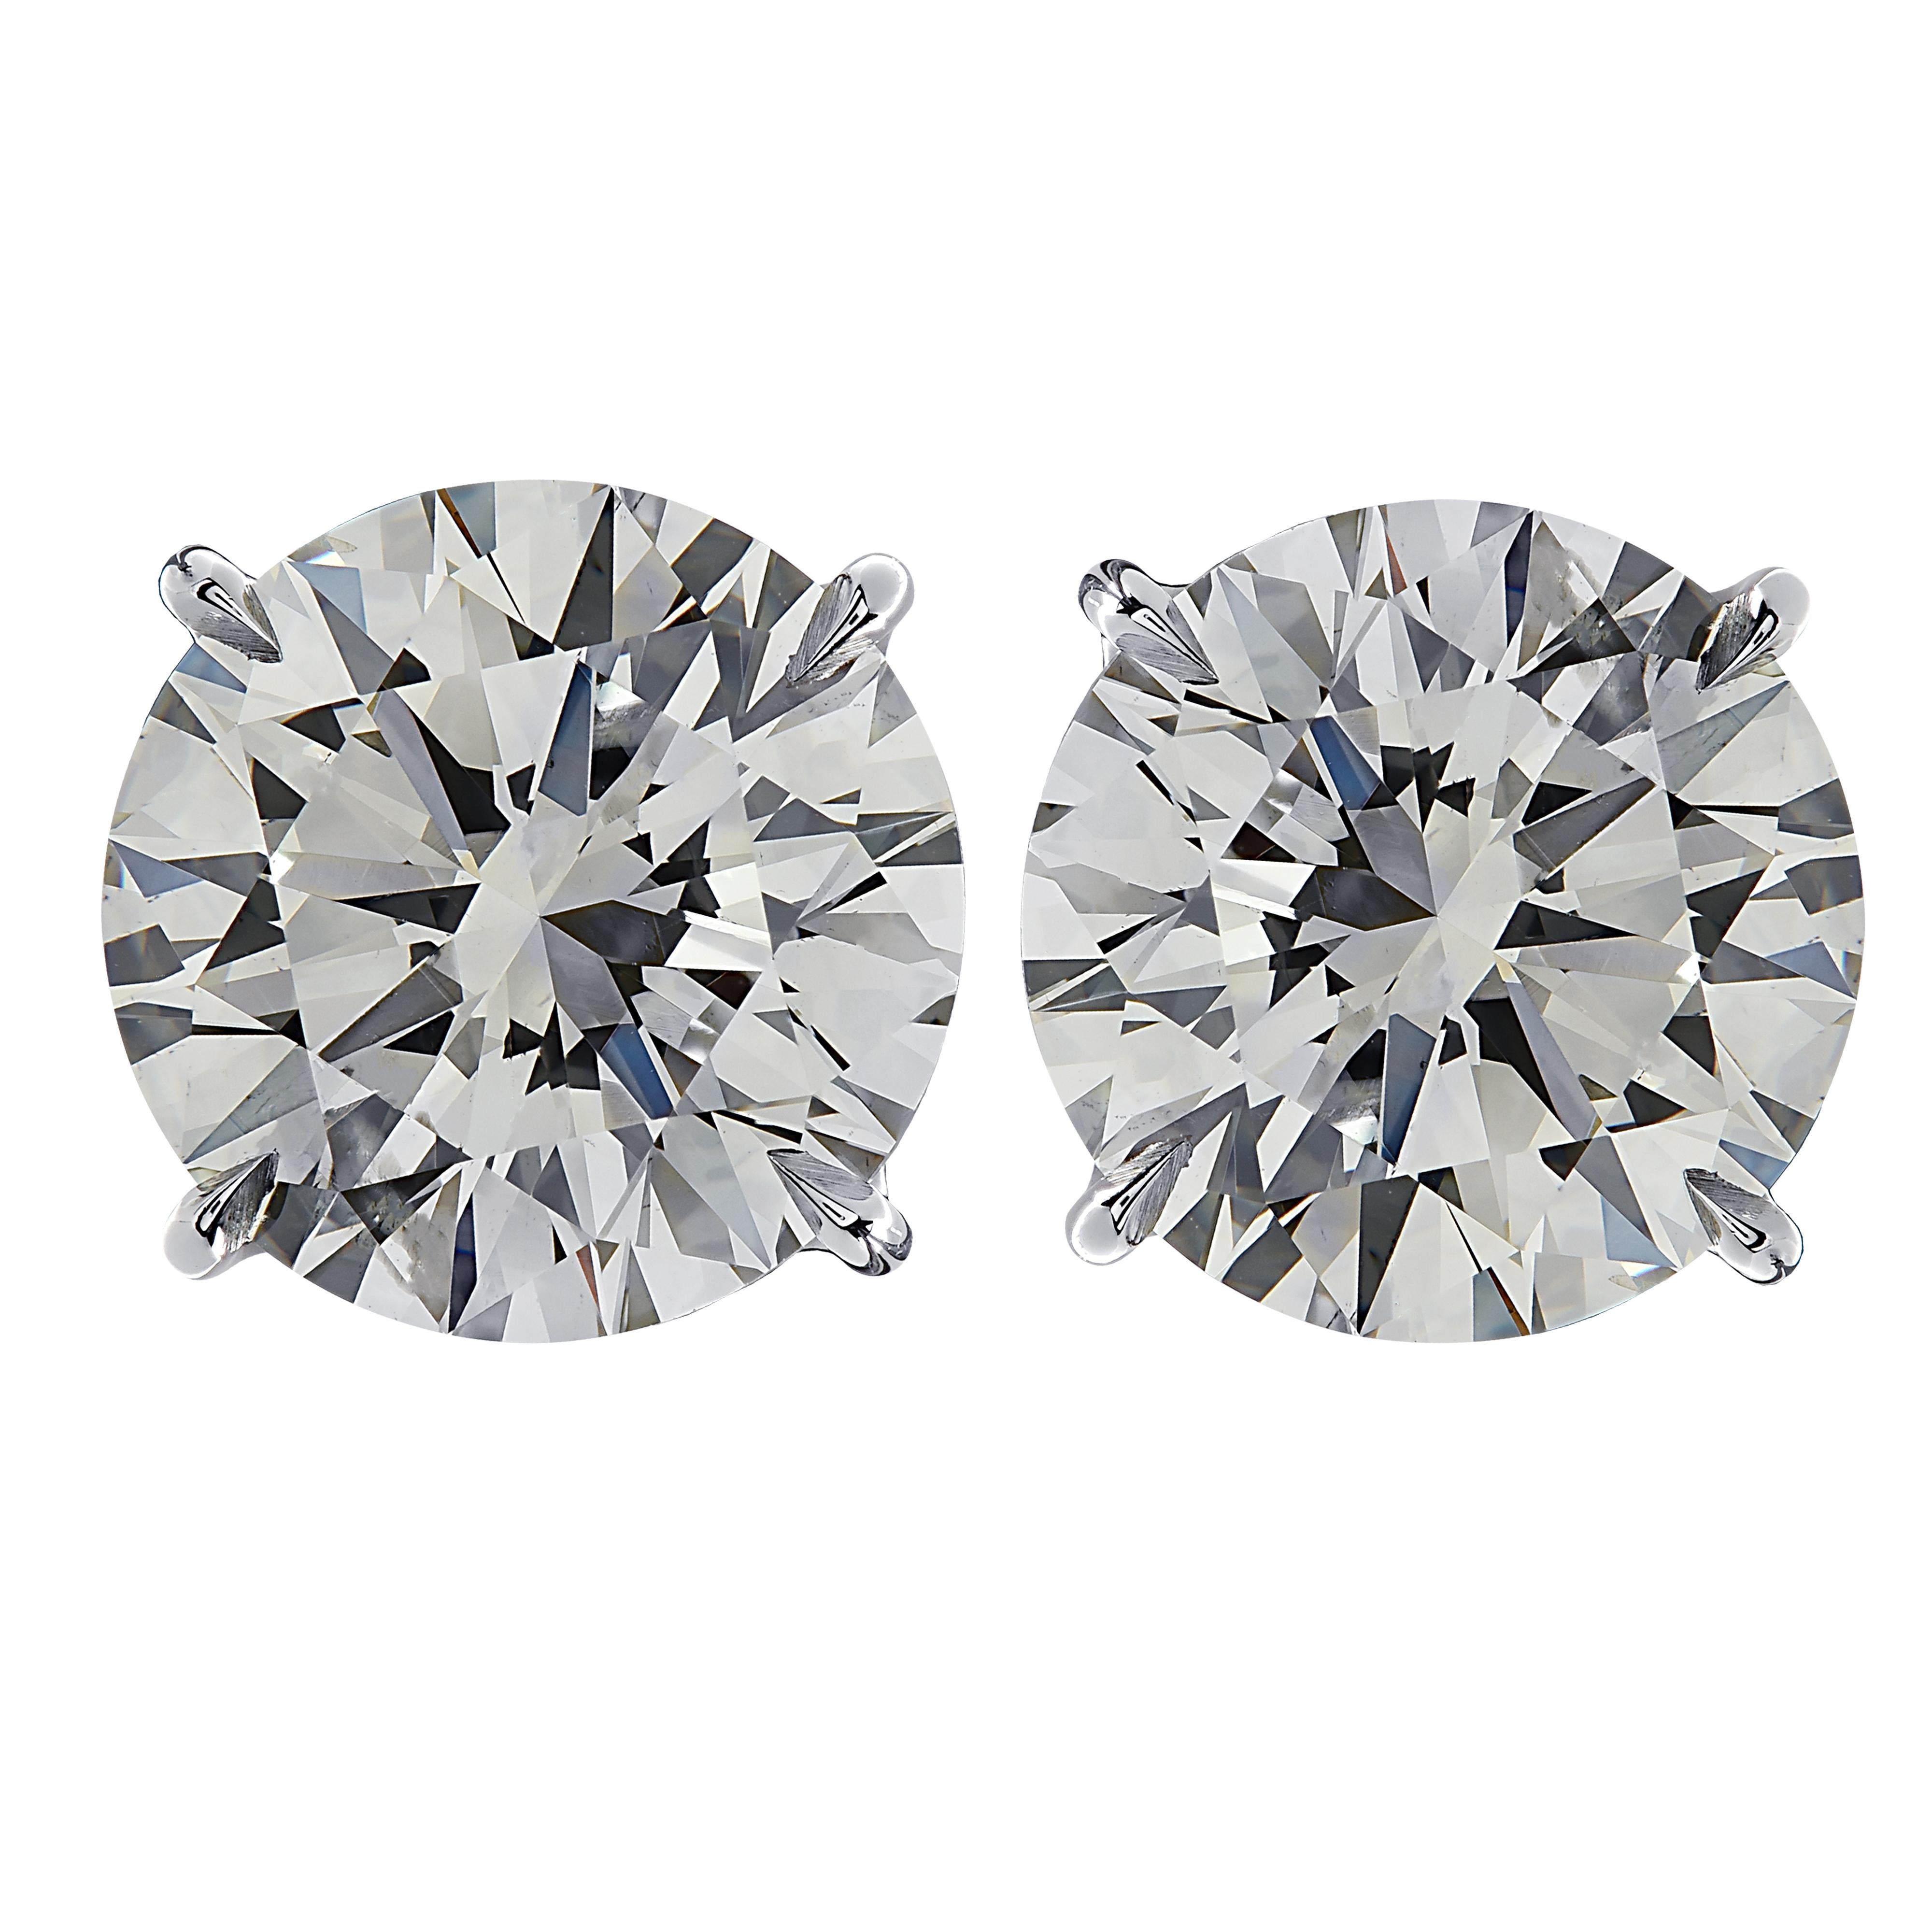 Stunning Vivid Diamonds solitaire stud earrings crafted in 18 karat white gold, showcasing 2 spectacular round brilliant cut diamonds weighing 15.77 carats total, K-L color and VS1-SI2 clarity. These diamonds were carefully selected and perfectly